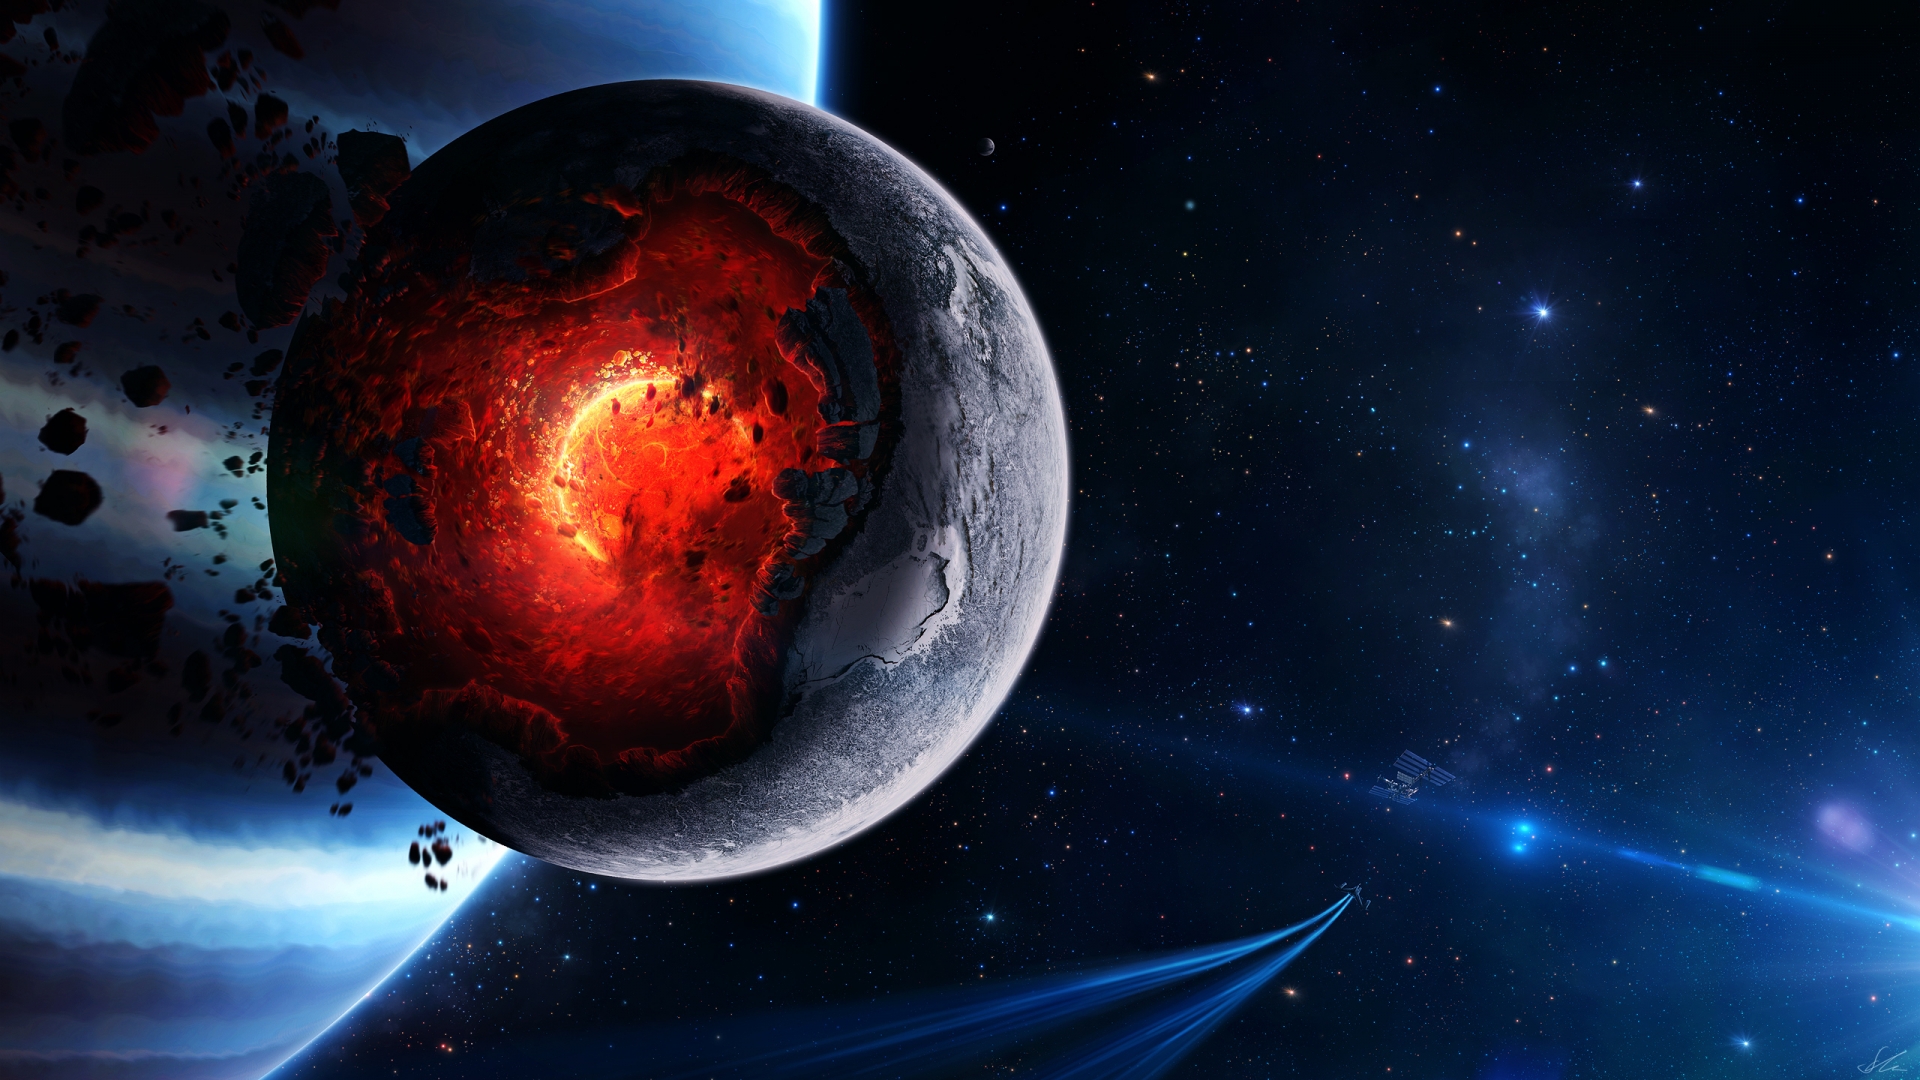 Space Planet Disaster for 1920 x 1080 HDTV 1080p resolution